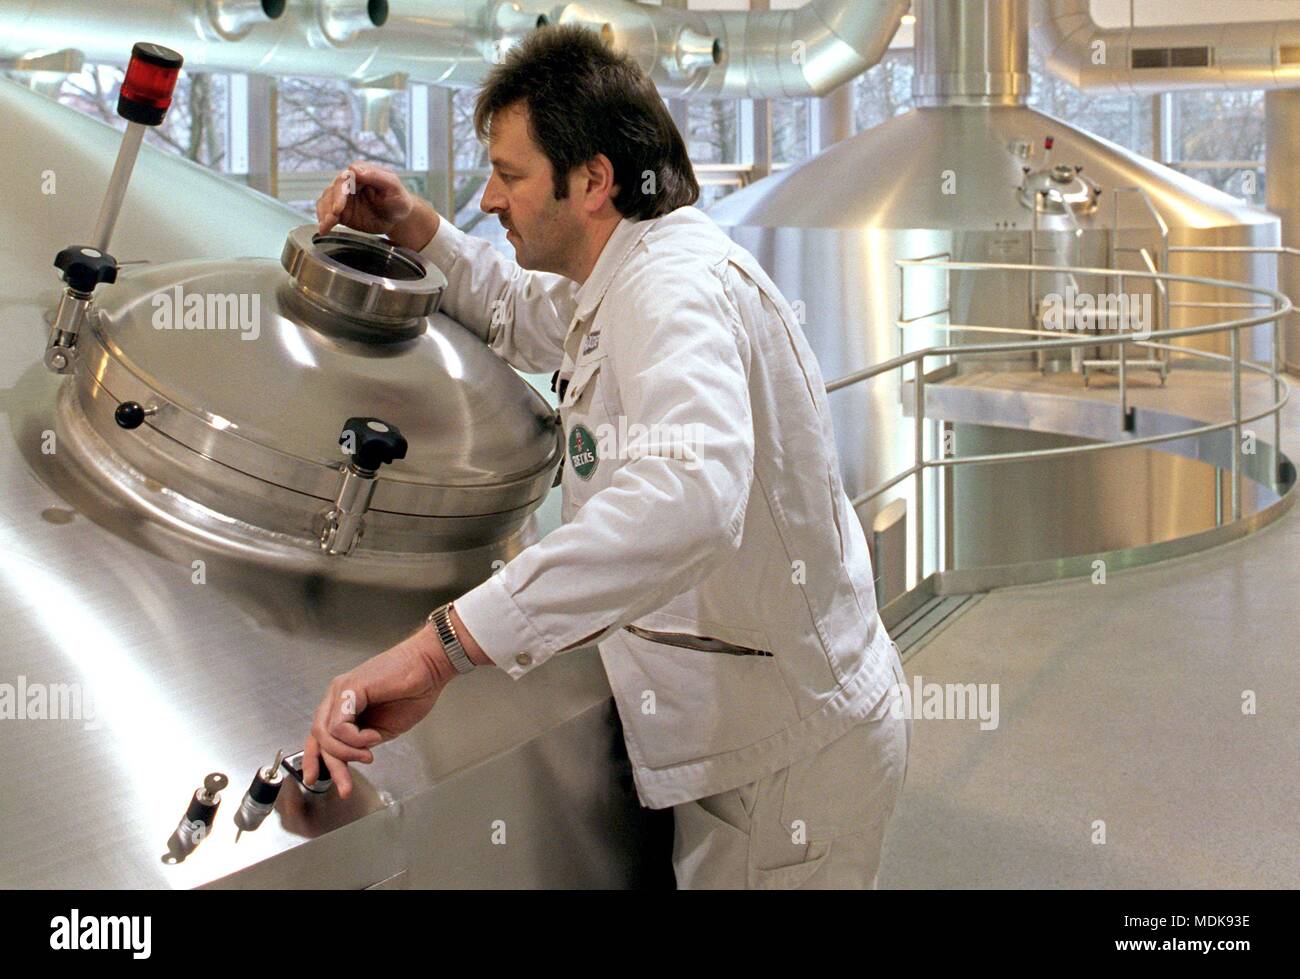 A brewing master of the Bremer Beck & Co. brewery controls the correct course of beer production in the new brewhouse of Germanys largest export brewery (archive picture from 08.12.1997). The personal concern for production in the computer-controlled high-tech brewhouse ensures quality and consistency in the brewing process. In keeping with its 125th anniversary (June 27, 1998), Beck has increased beer sales by just over two percent. By the end of the financial year 1997/98 on June 30, then the limit of five million hectoliters would be exceeded, said managing director Gotz-Michael Mullerwith. Stock Photo